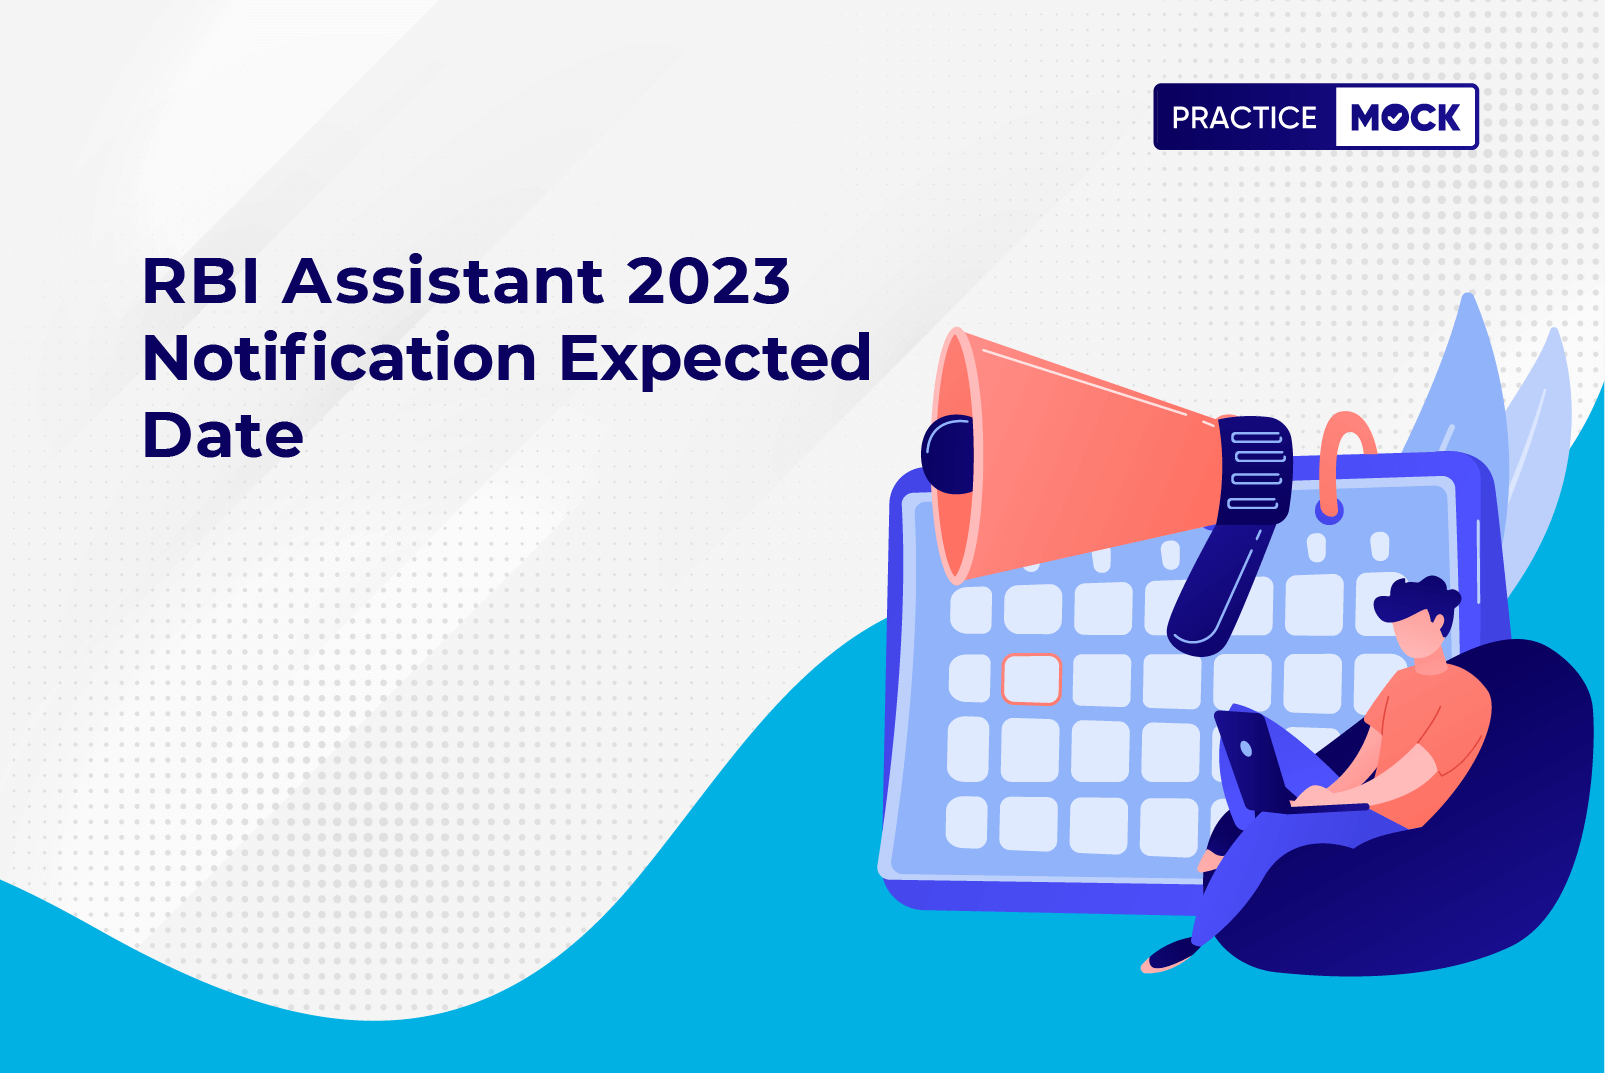 RBI Assistant 2023 Notification Expected Date PracticeMock